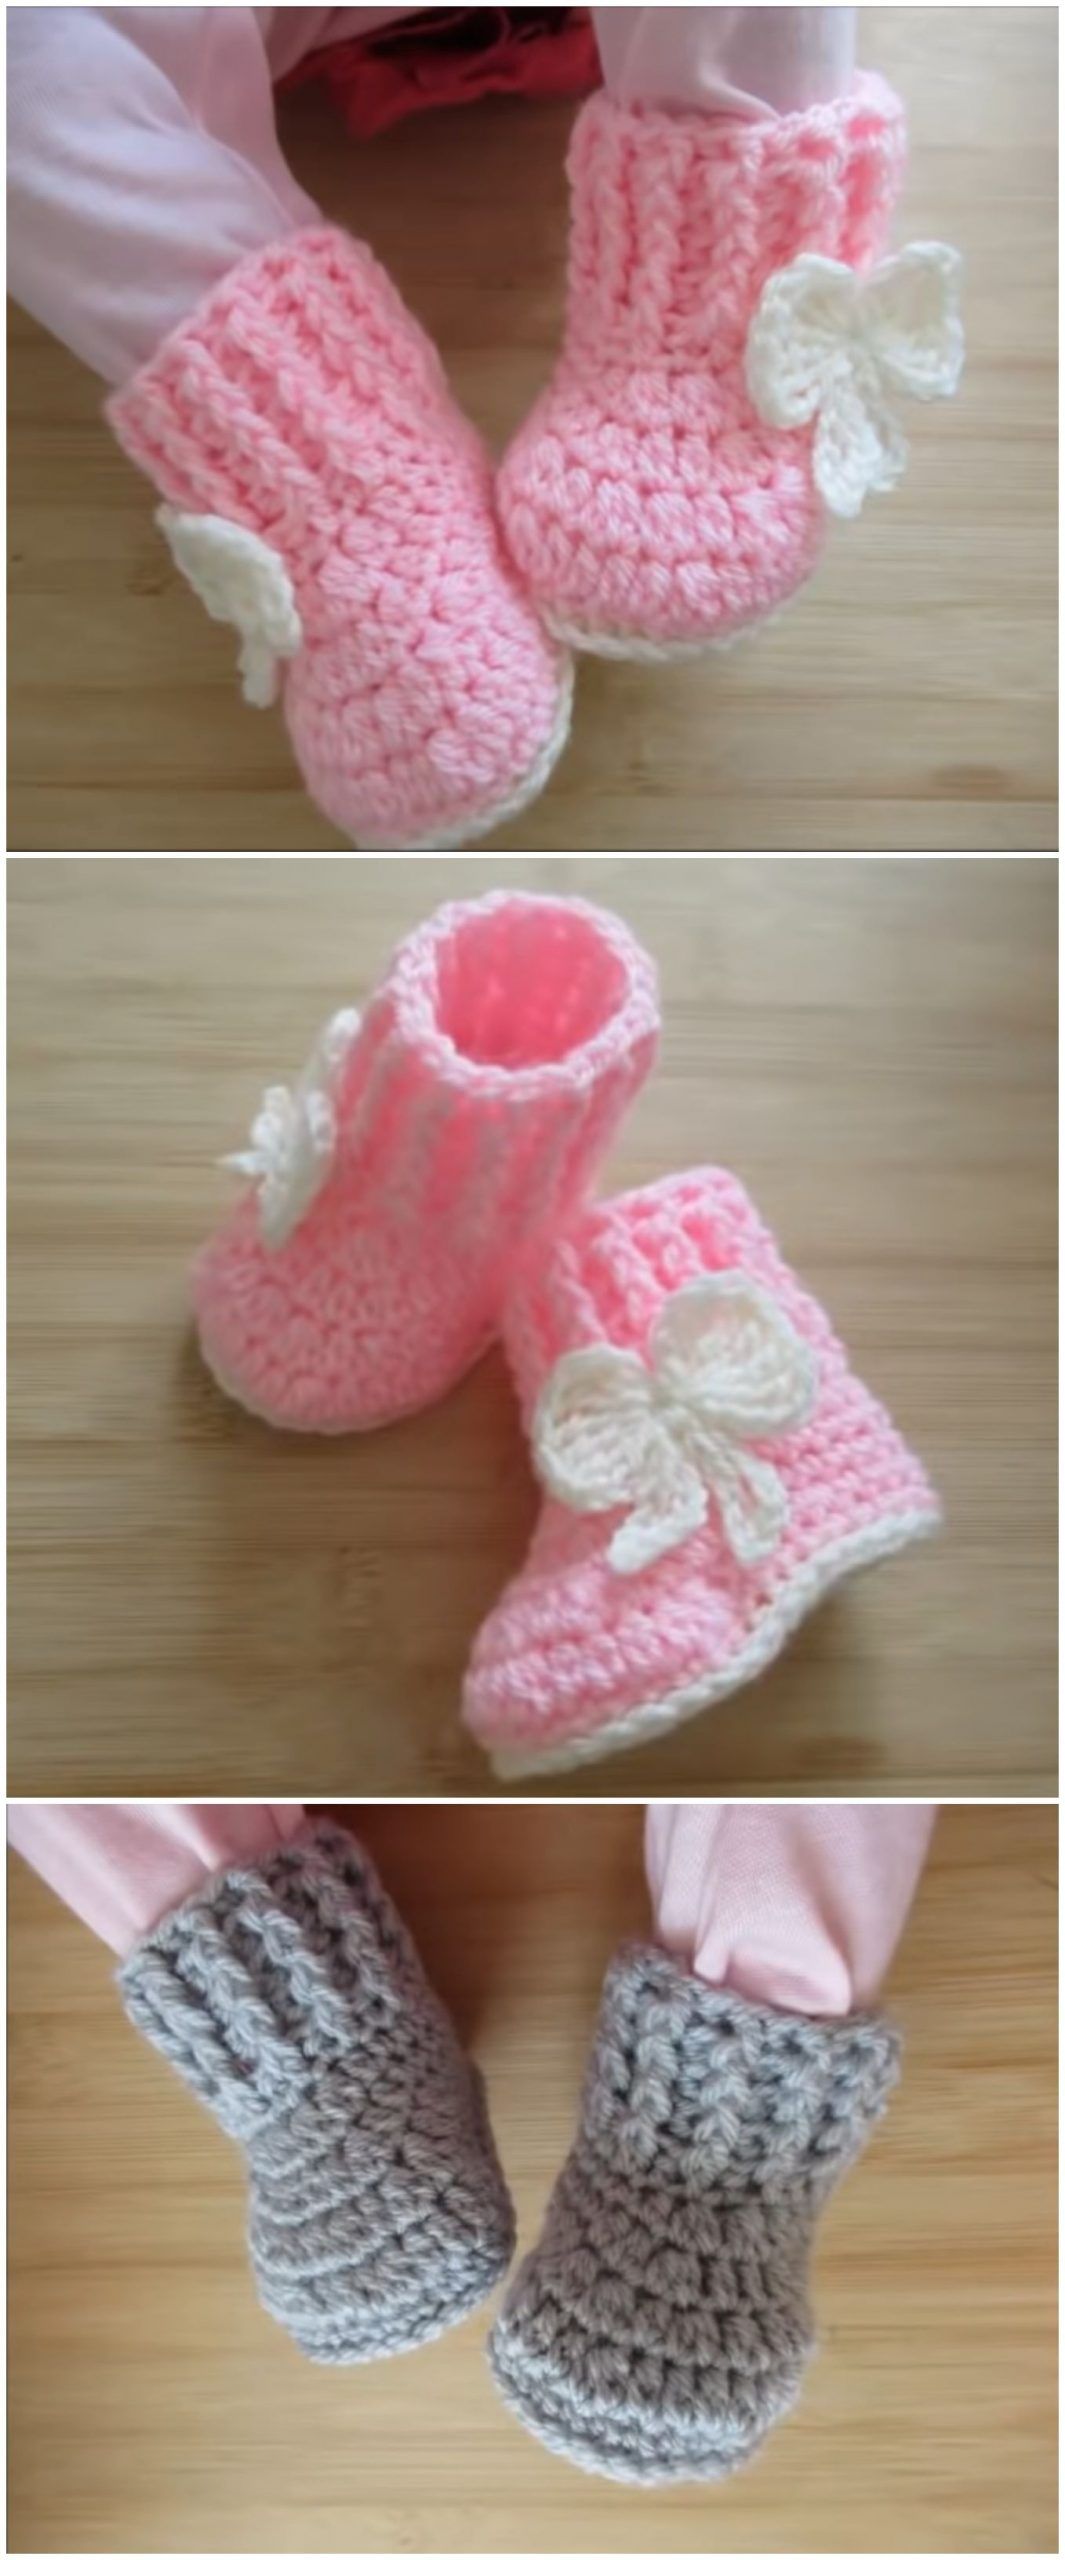 Crochet Fast And Easy Baby Booties -   20 knitting and crochet baby booties ideas